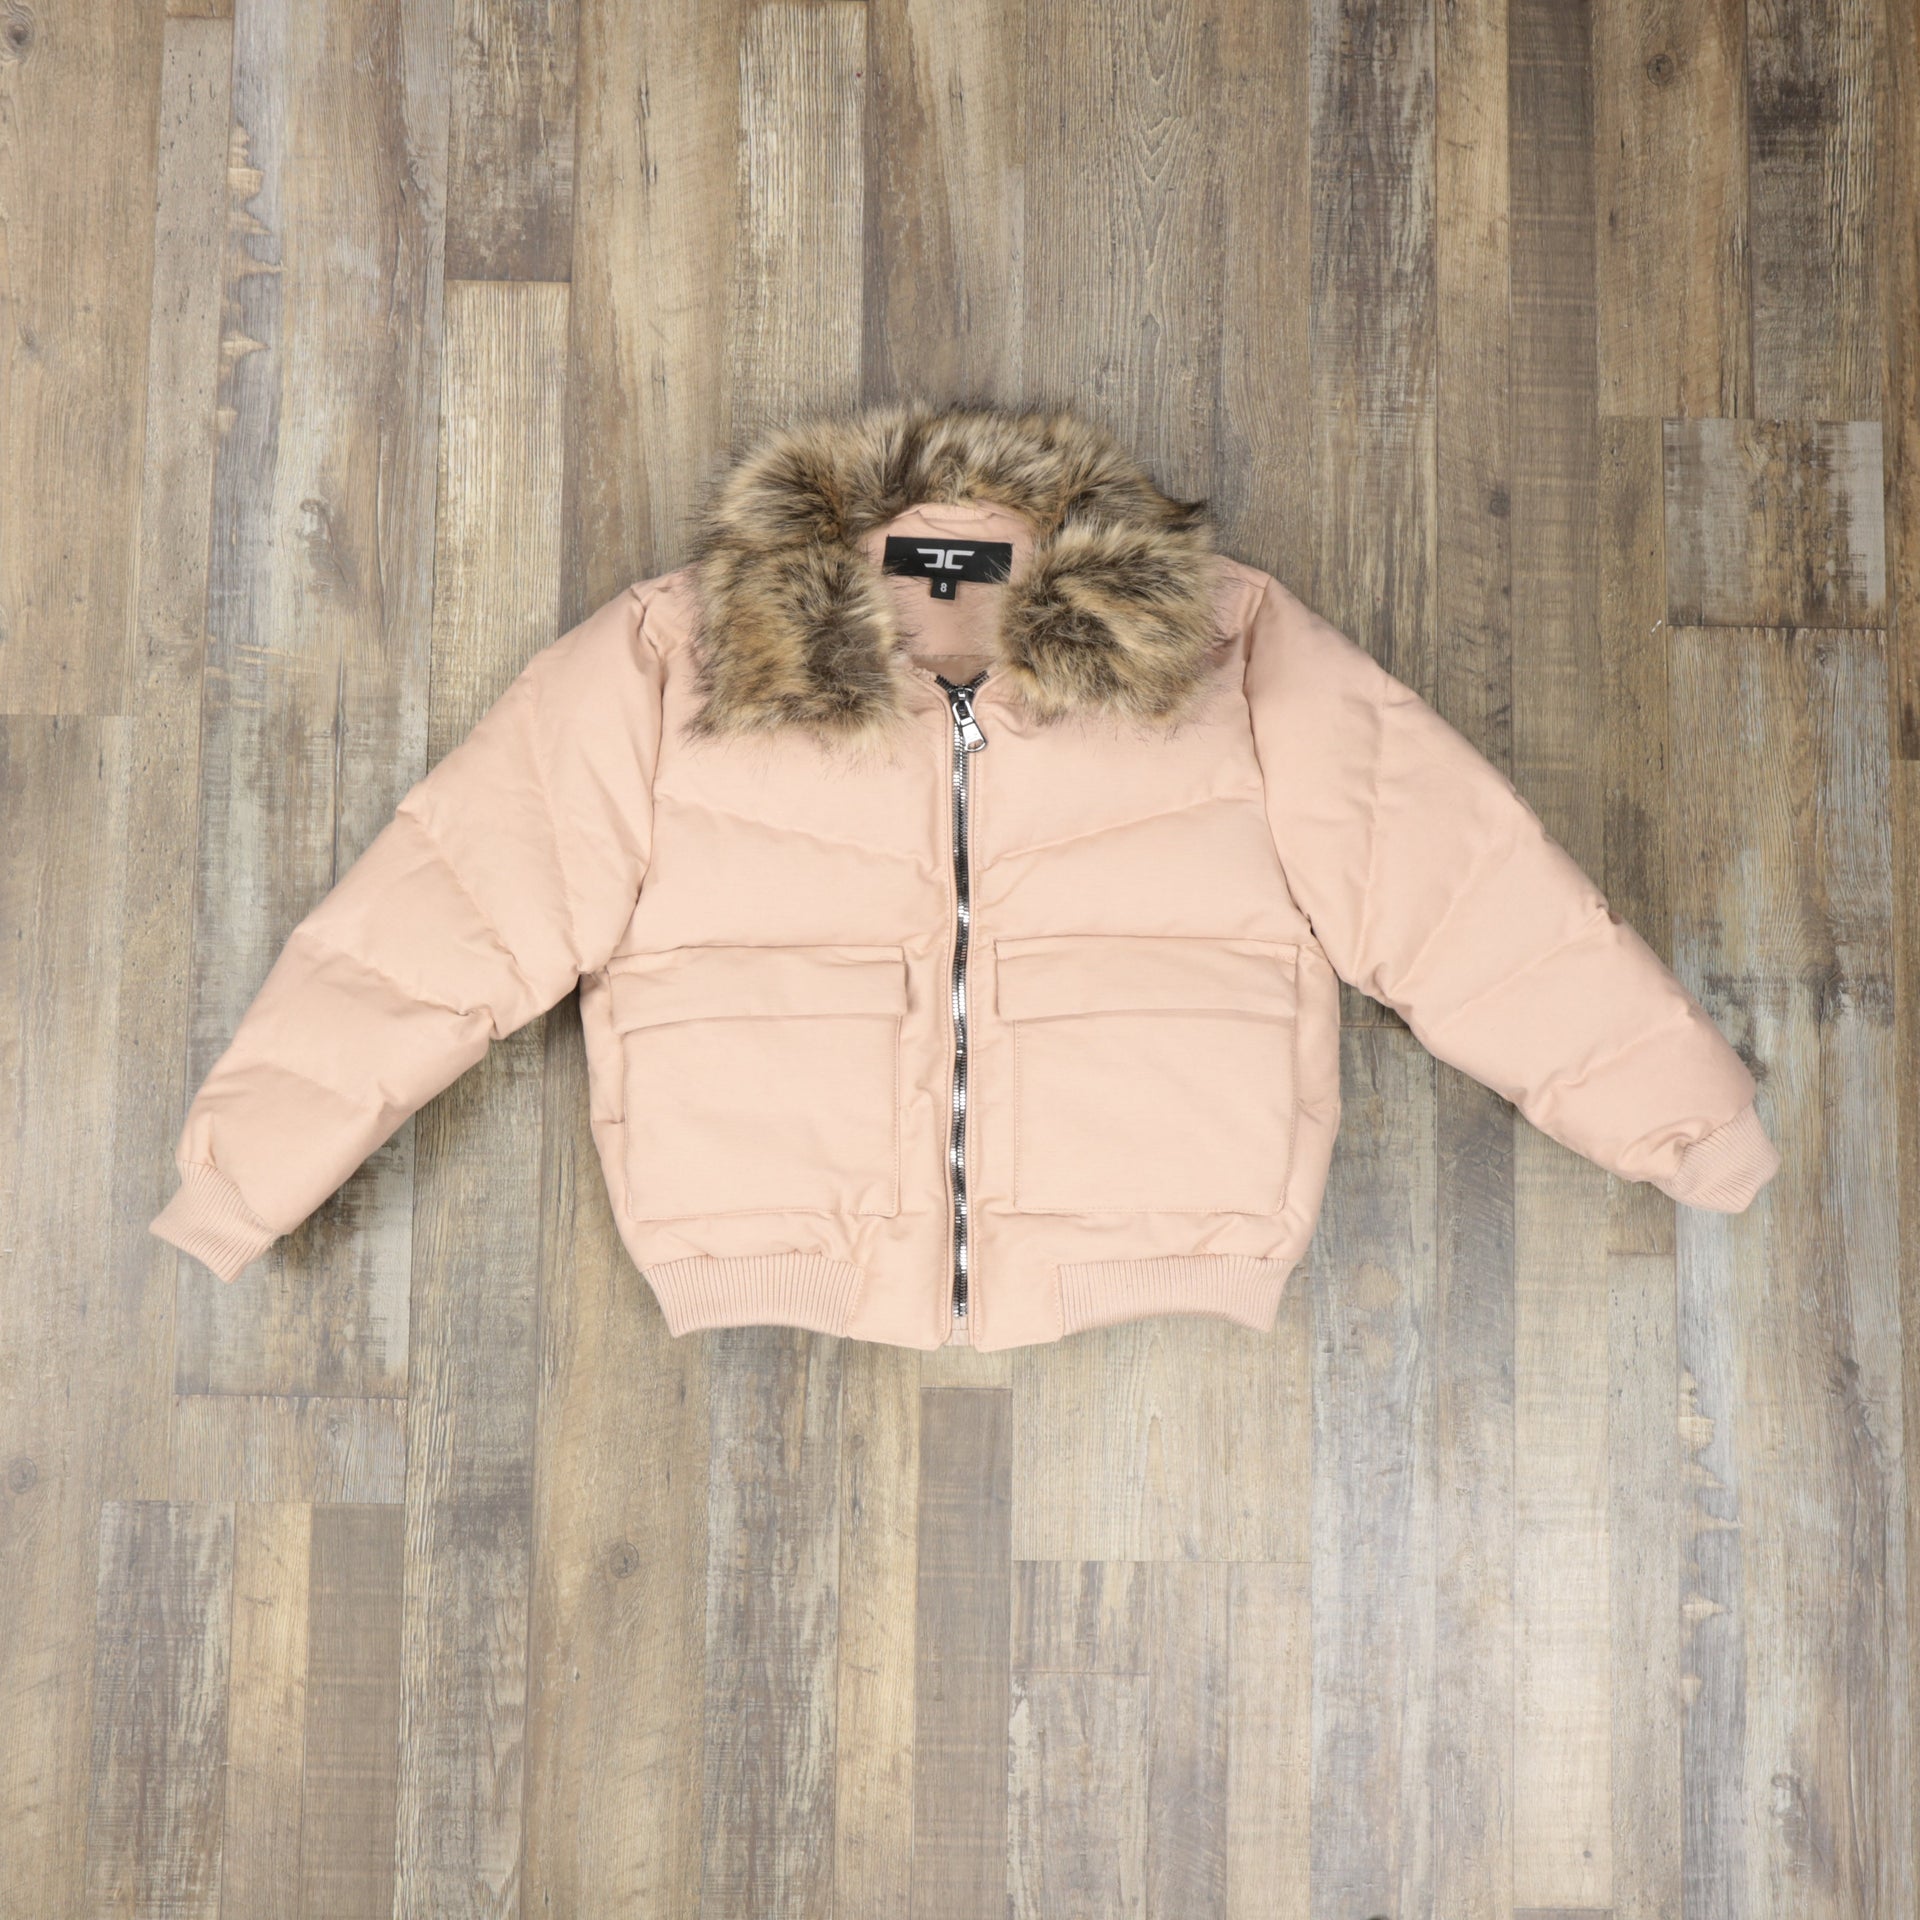 front of the jacket with no hood Youth Dusty Rose Bubble Puffer Parka Jacket With Removable Faux Fur Hood (Vegan Fur)